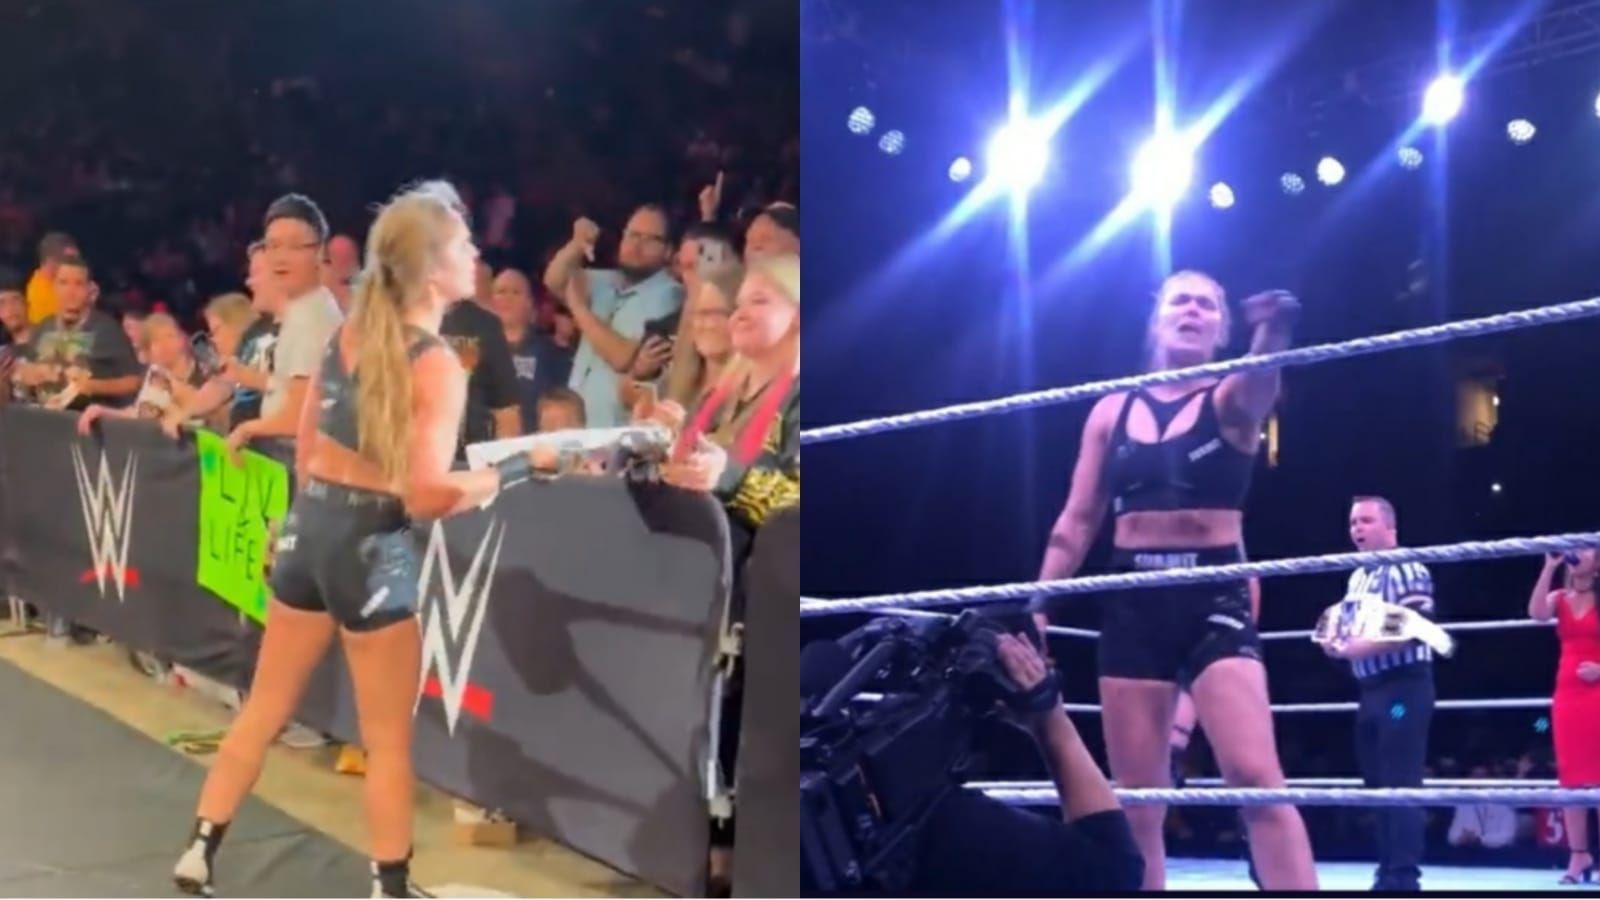 Ronda Rousey was in action at WWE event in Dayton, Ohio!